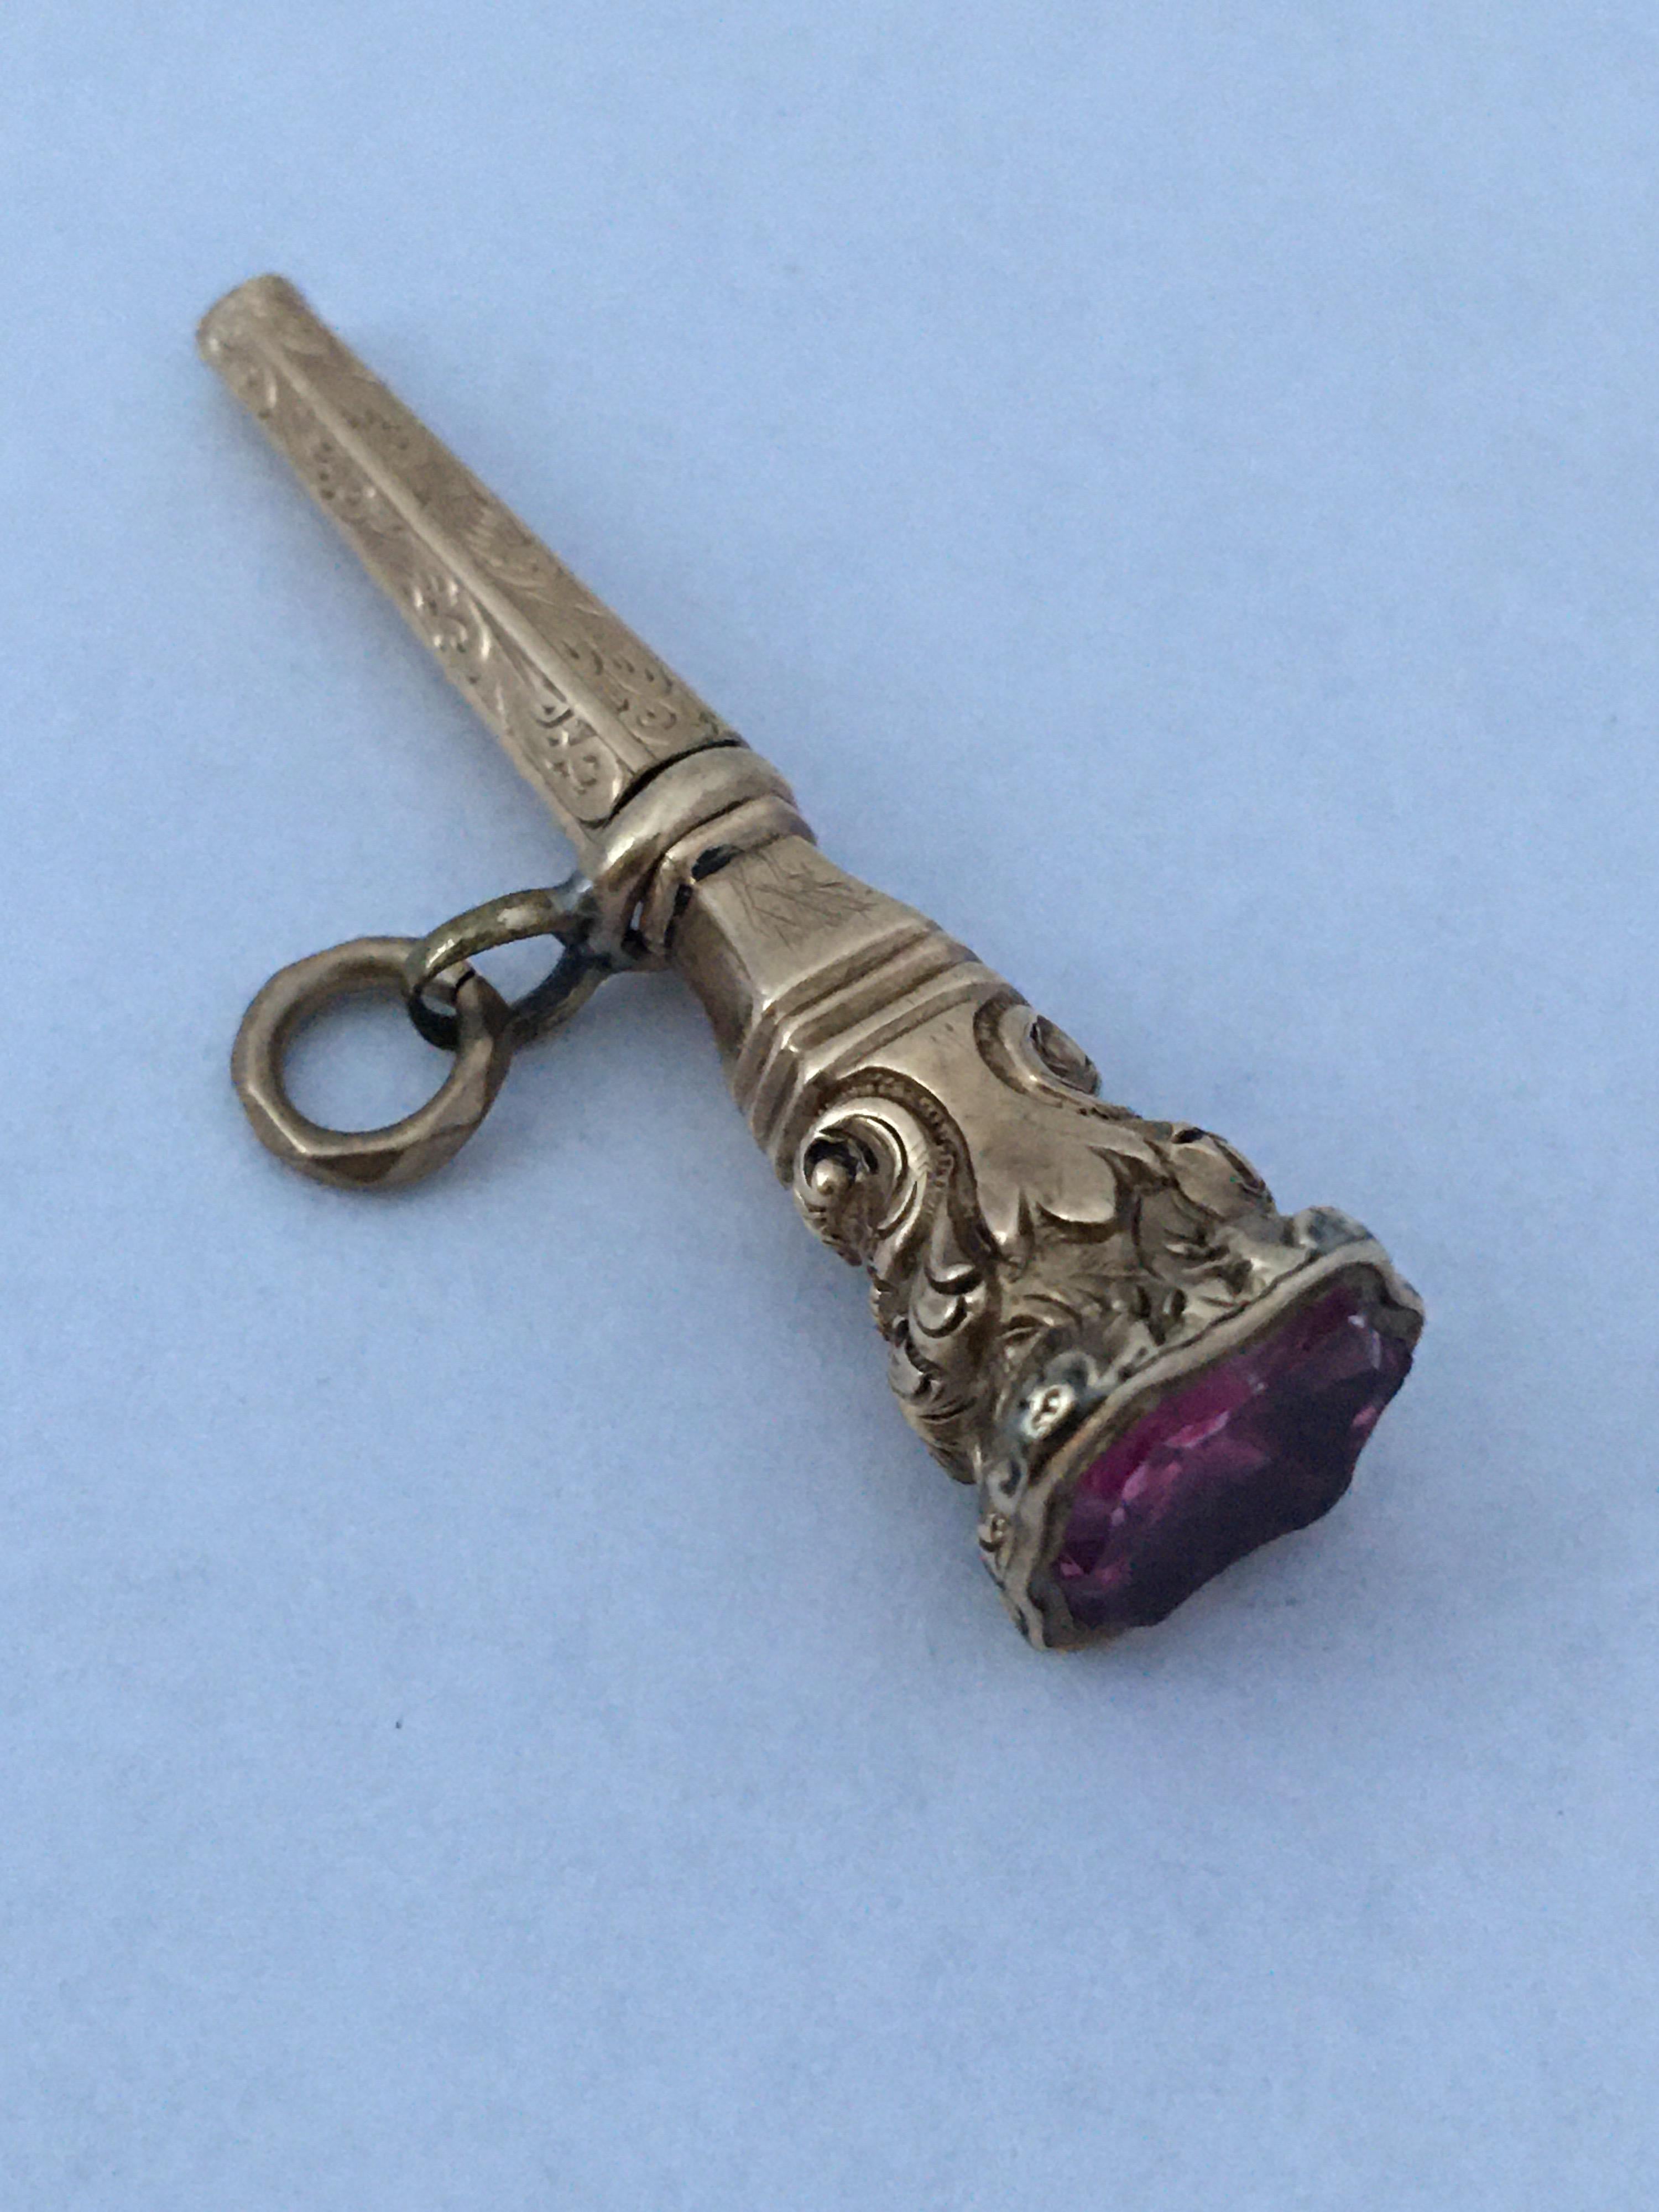 This ornate Gold Antique Victorian Watch Key Pendant features a dark pink Paste on the base and wonderful detailing throughout, modelled in finely engraved and carefully carved Gold cased metal.

Originally used to wind up a pocket watch, this would